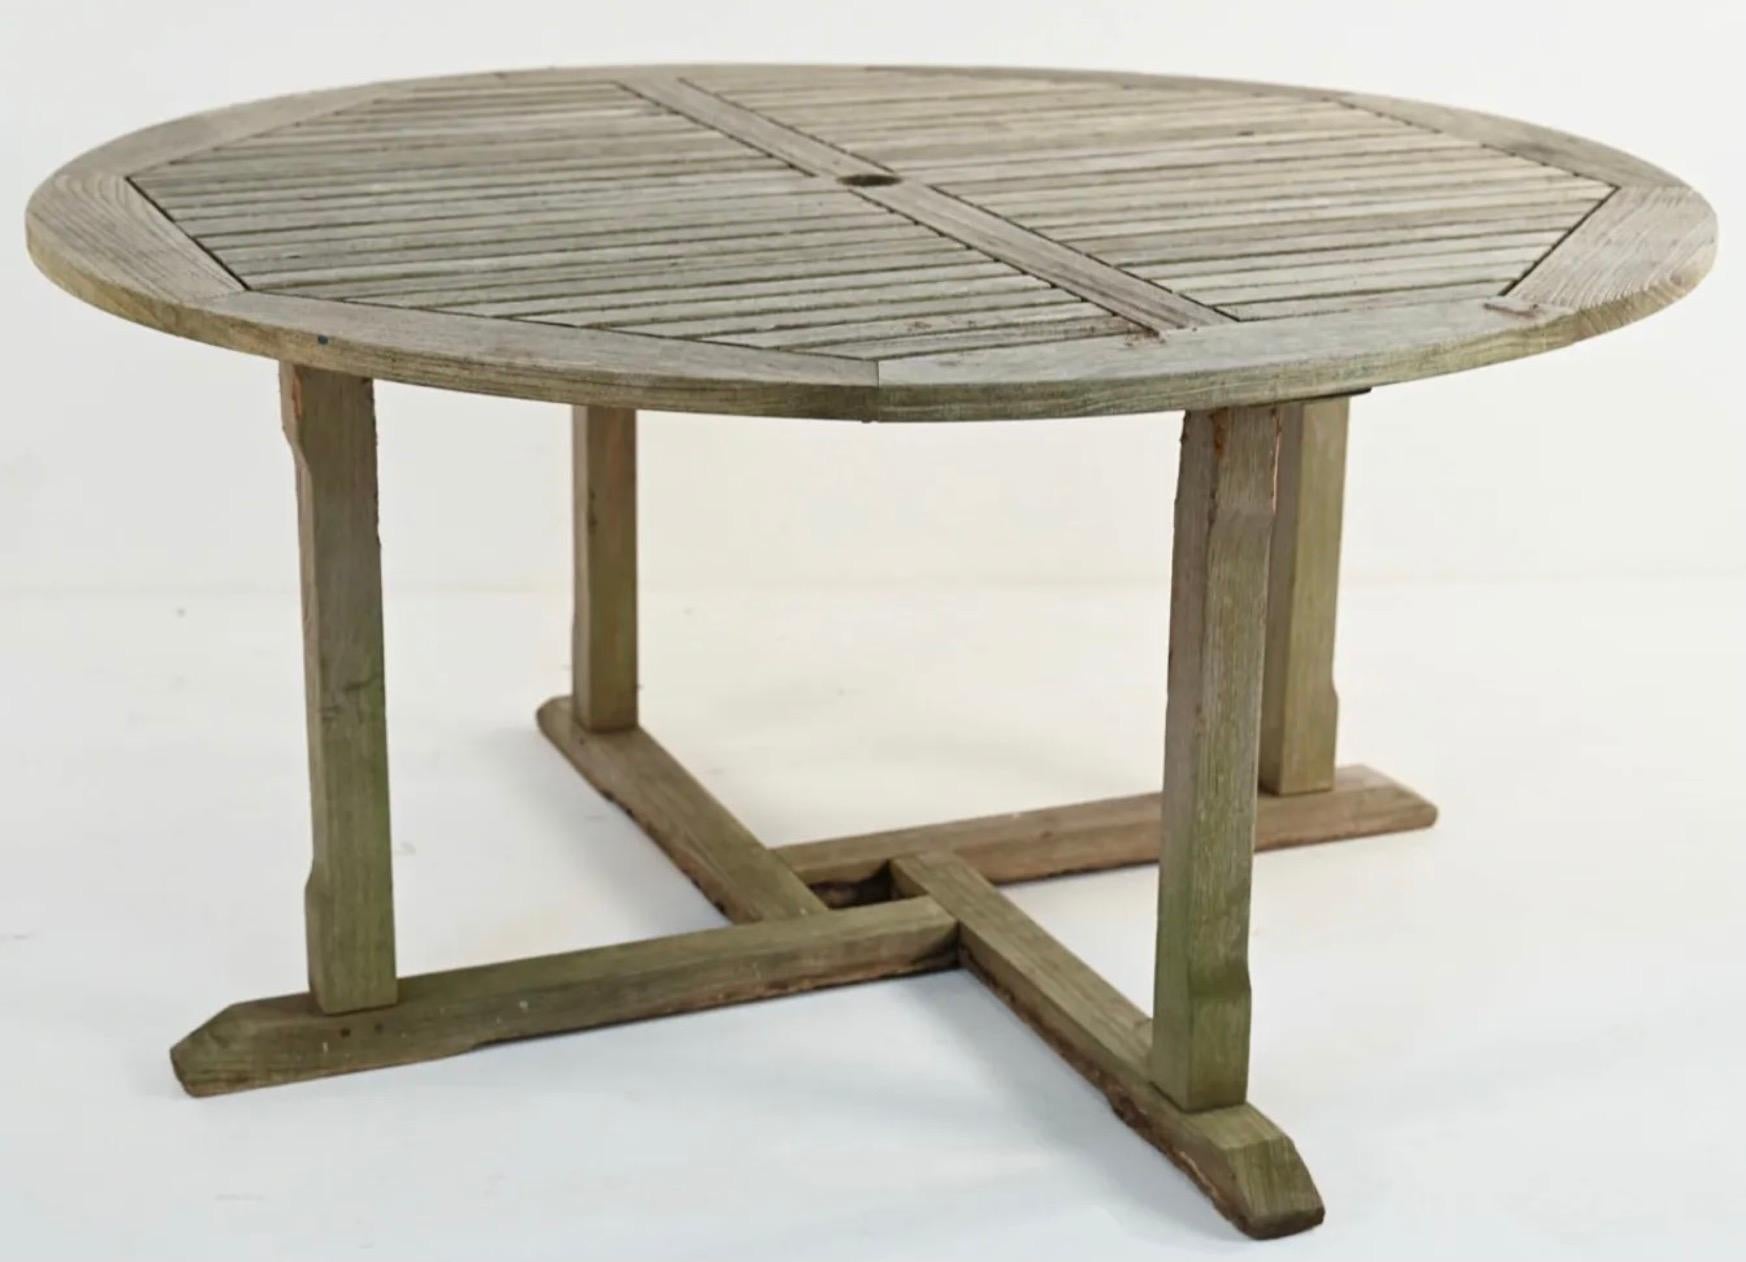 20th Century Vintage Round Teak Wood Outdoor Garden Dining Table For Sale